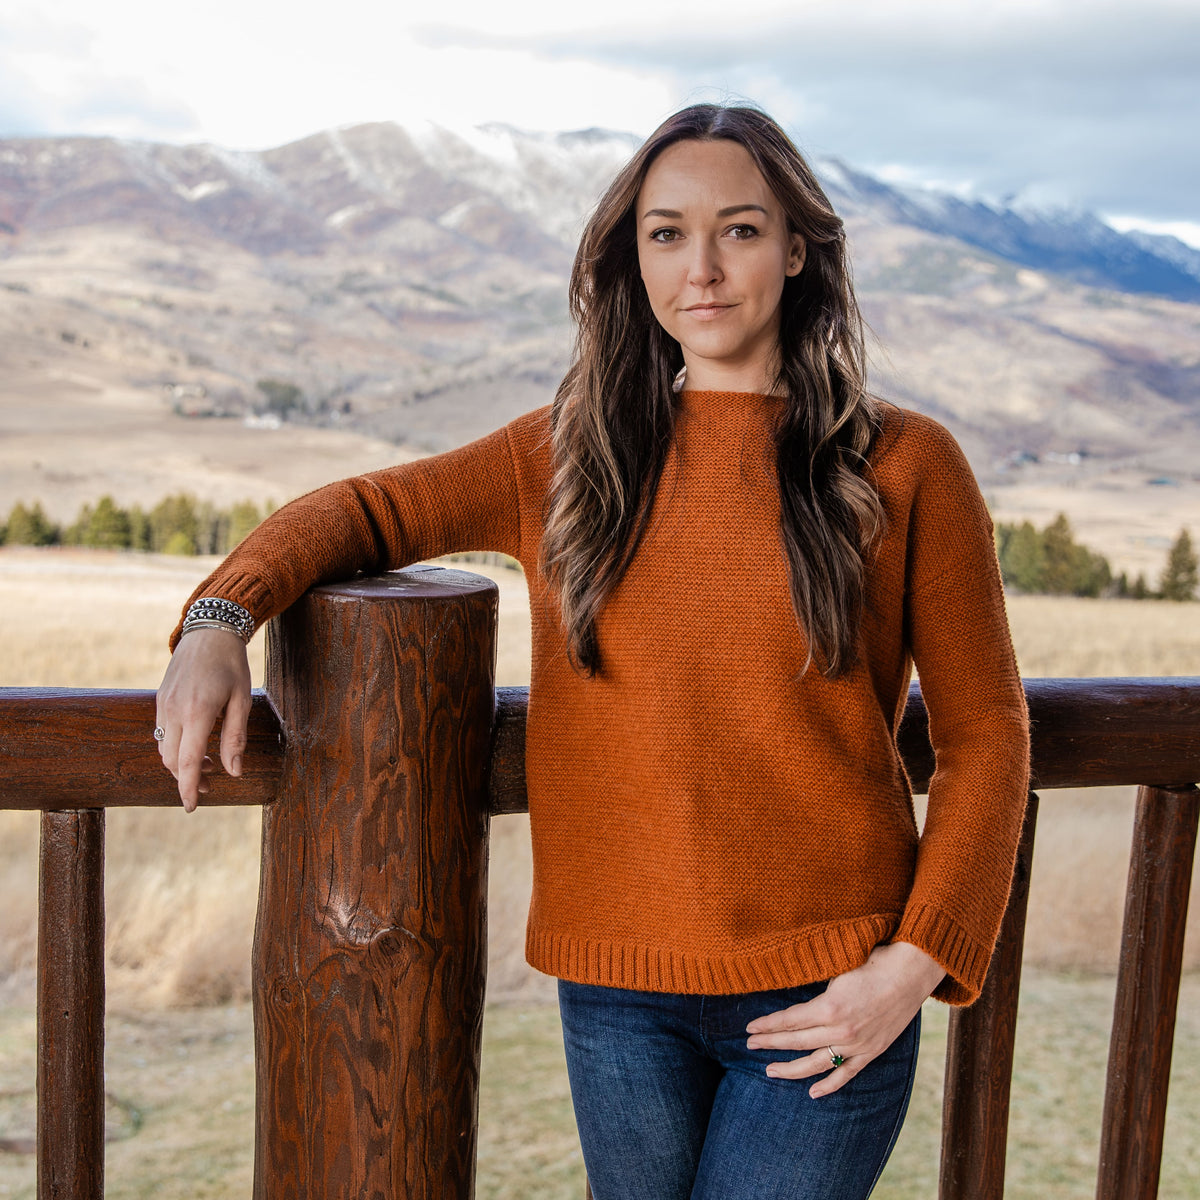 A brown-haired woman leaning against a wooden railing against a mountainous background wearing blue jeans and the Alpacas of Montana soft elegant cute comfortable cozy sweater in the color autumn orange.